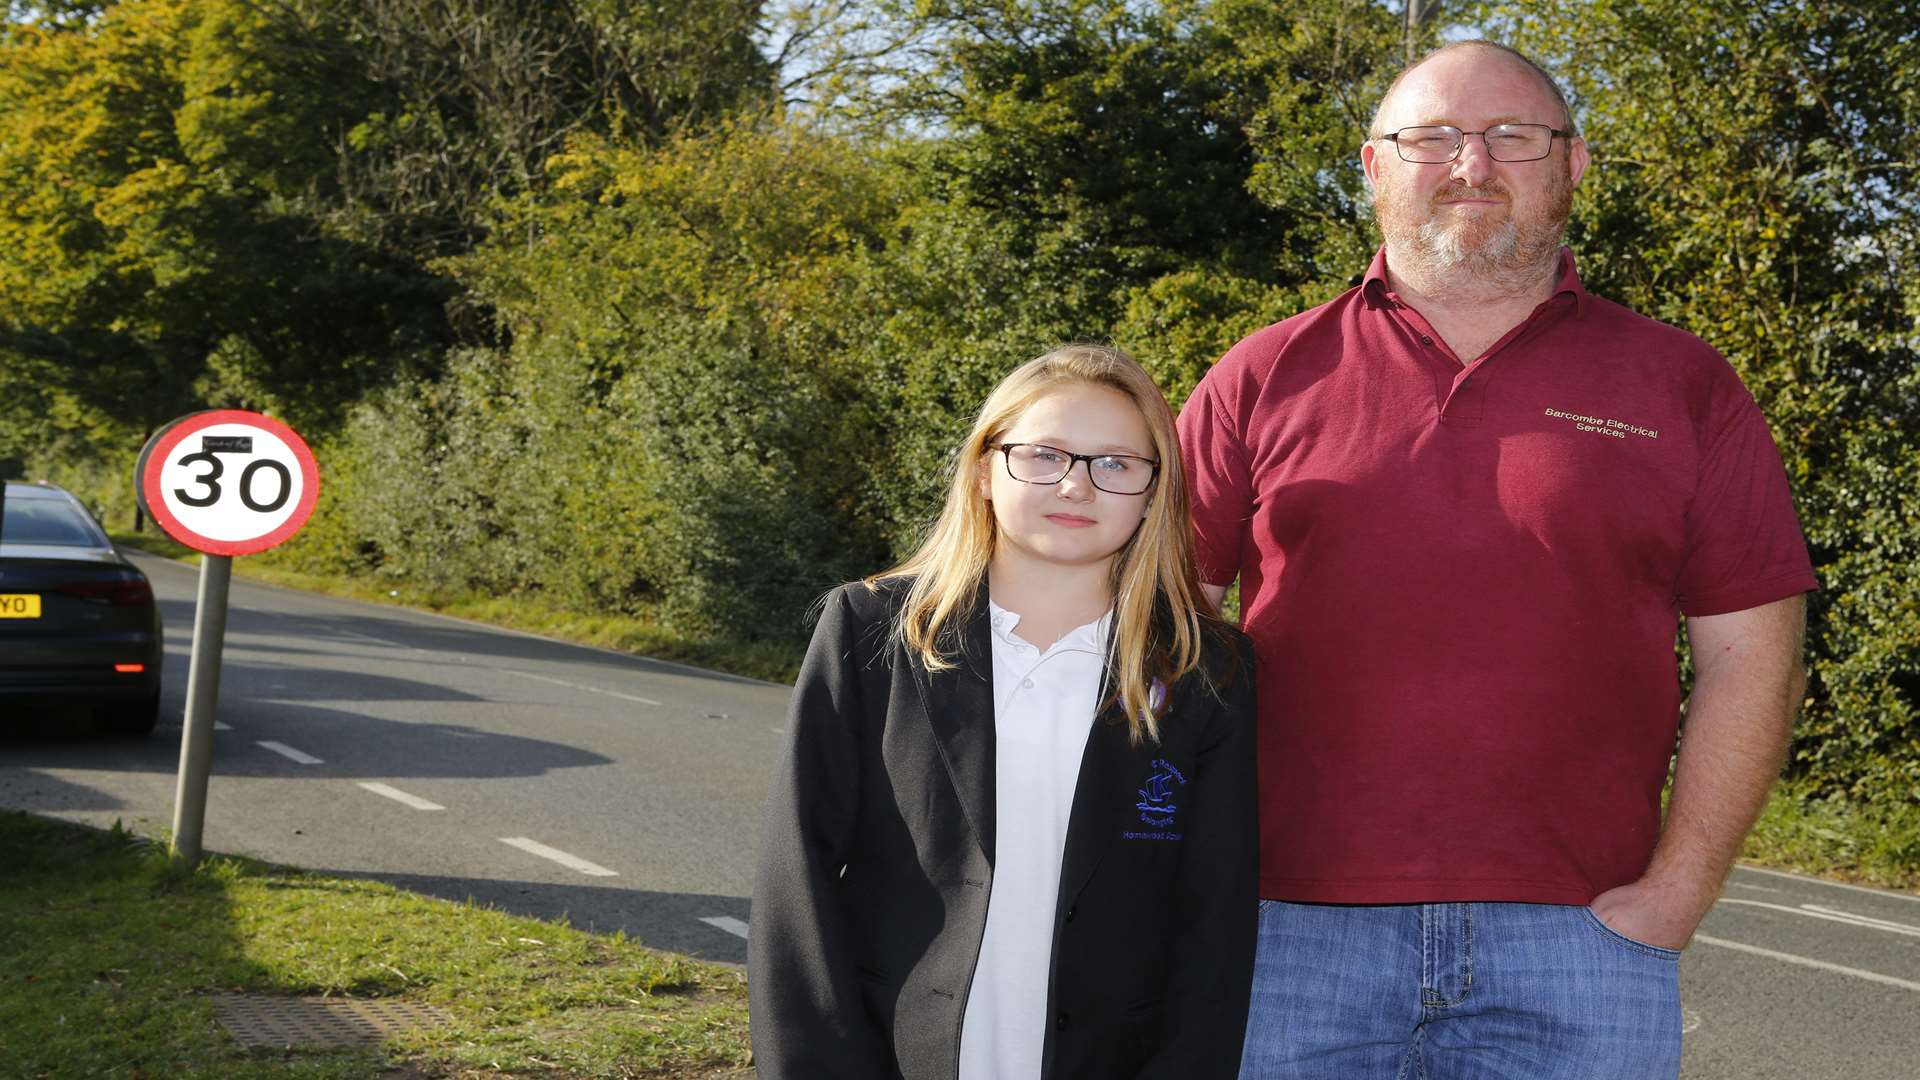 Tim and his daughter Charlotte,11, who has been denied free bus travel to school, despite her brother being granted it